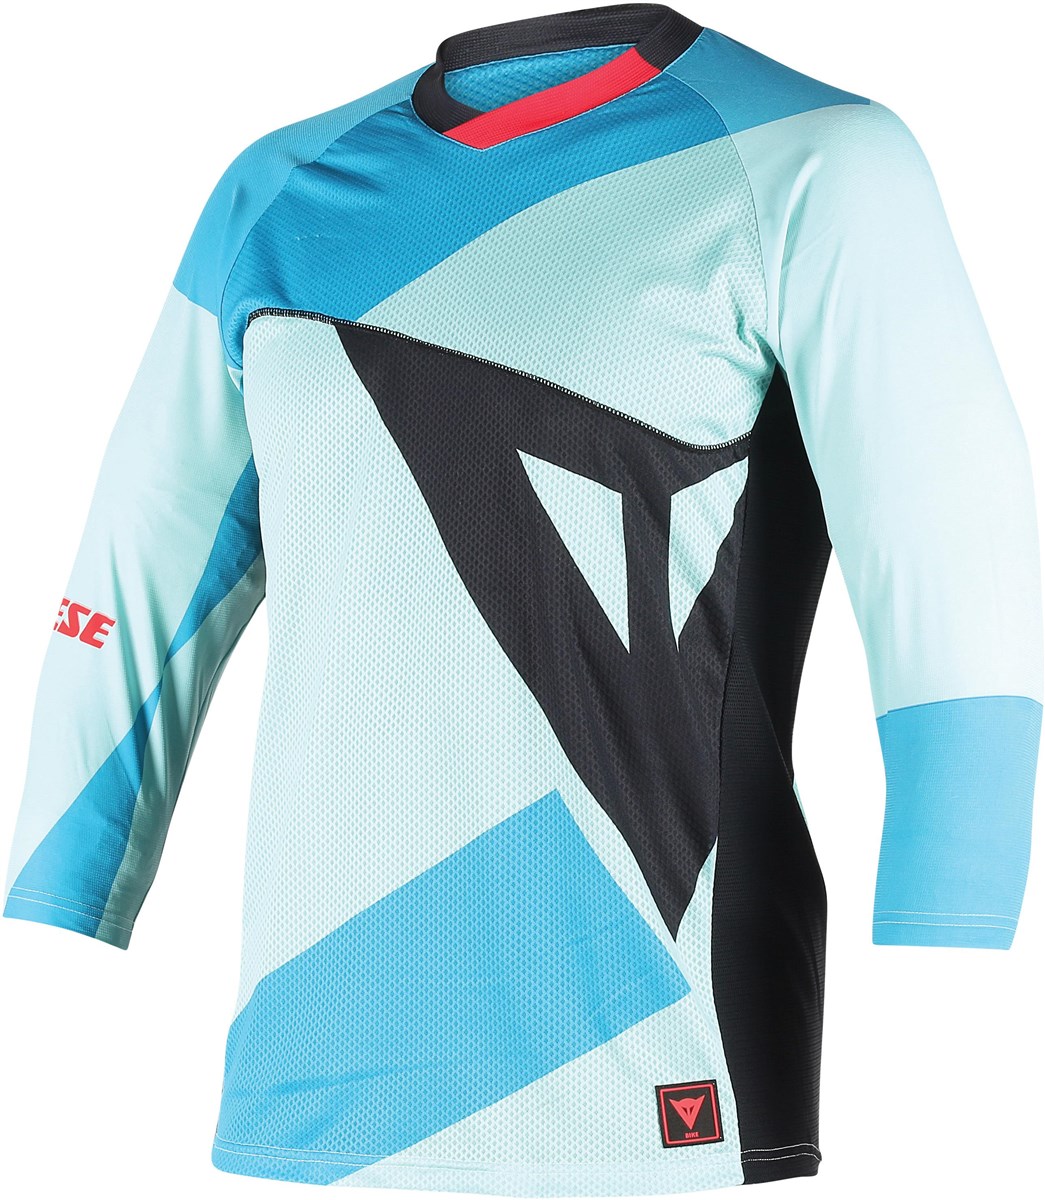 Dainese Trailtec 3/4 Sleeve Jersey 2017 product image